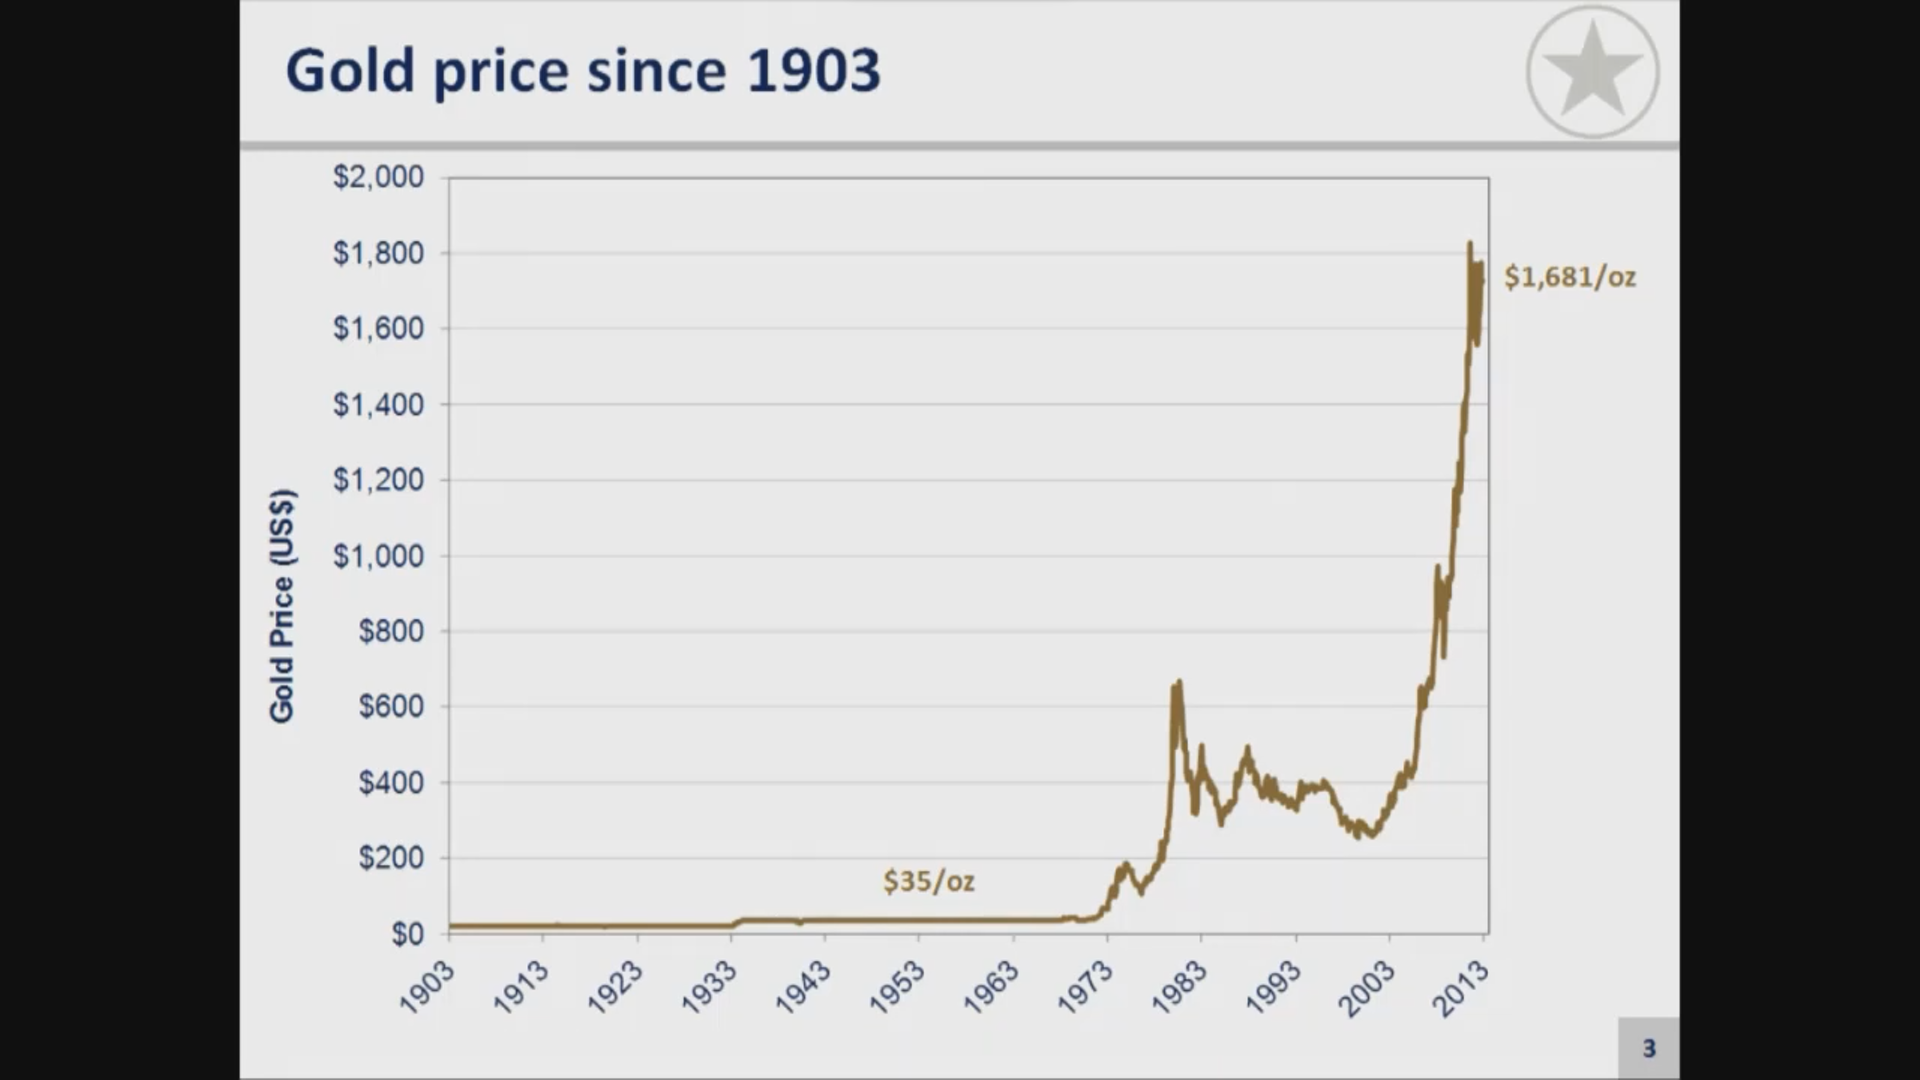 A line graph of Gold Price since 1903